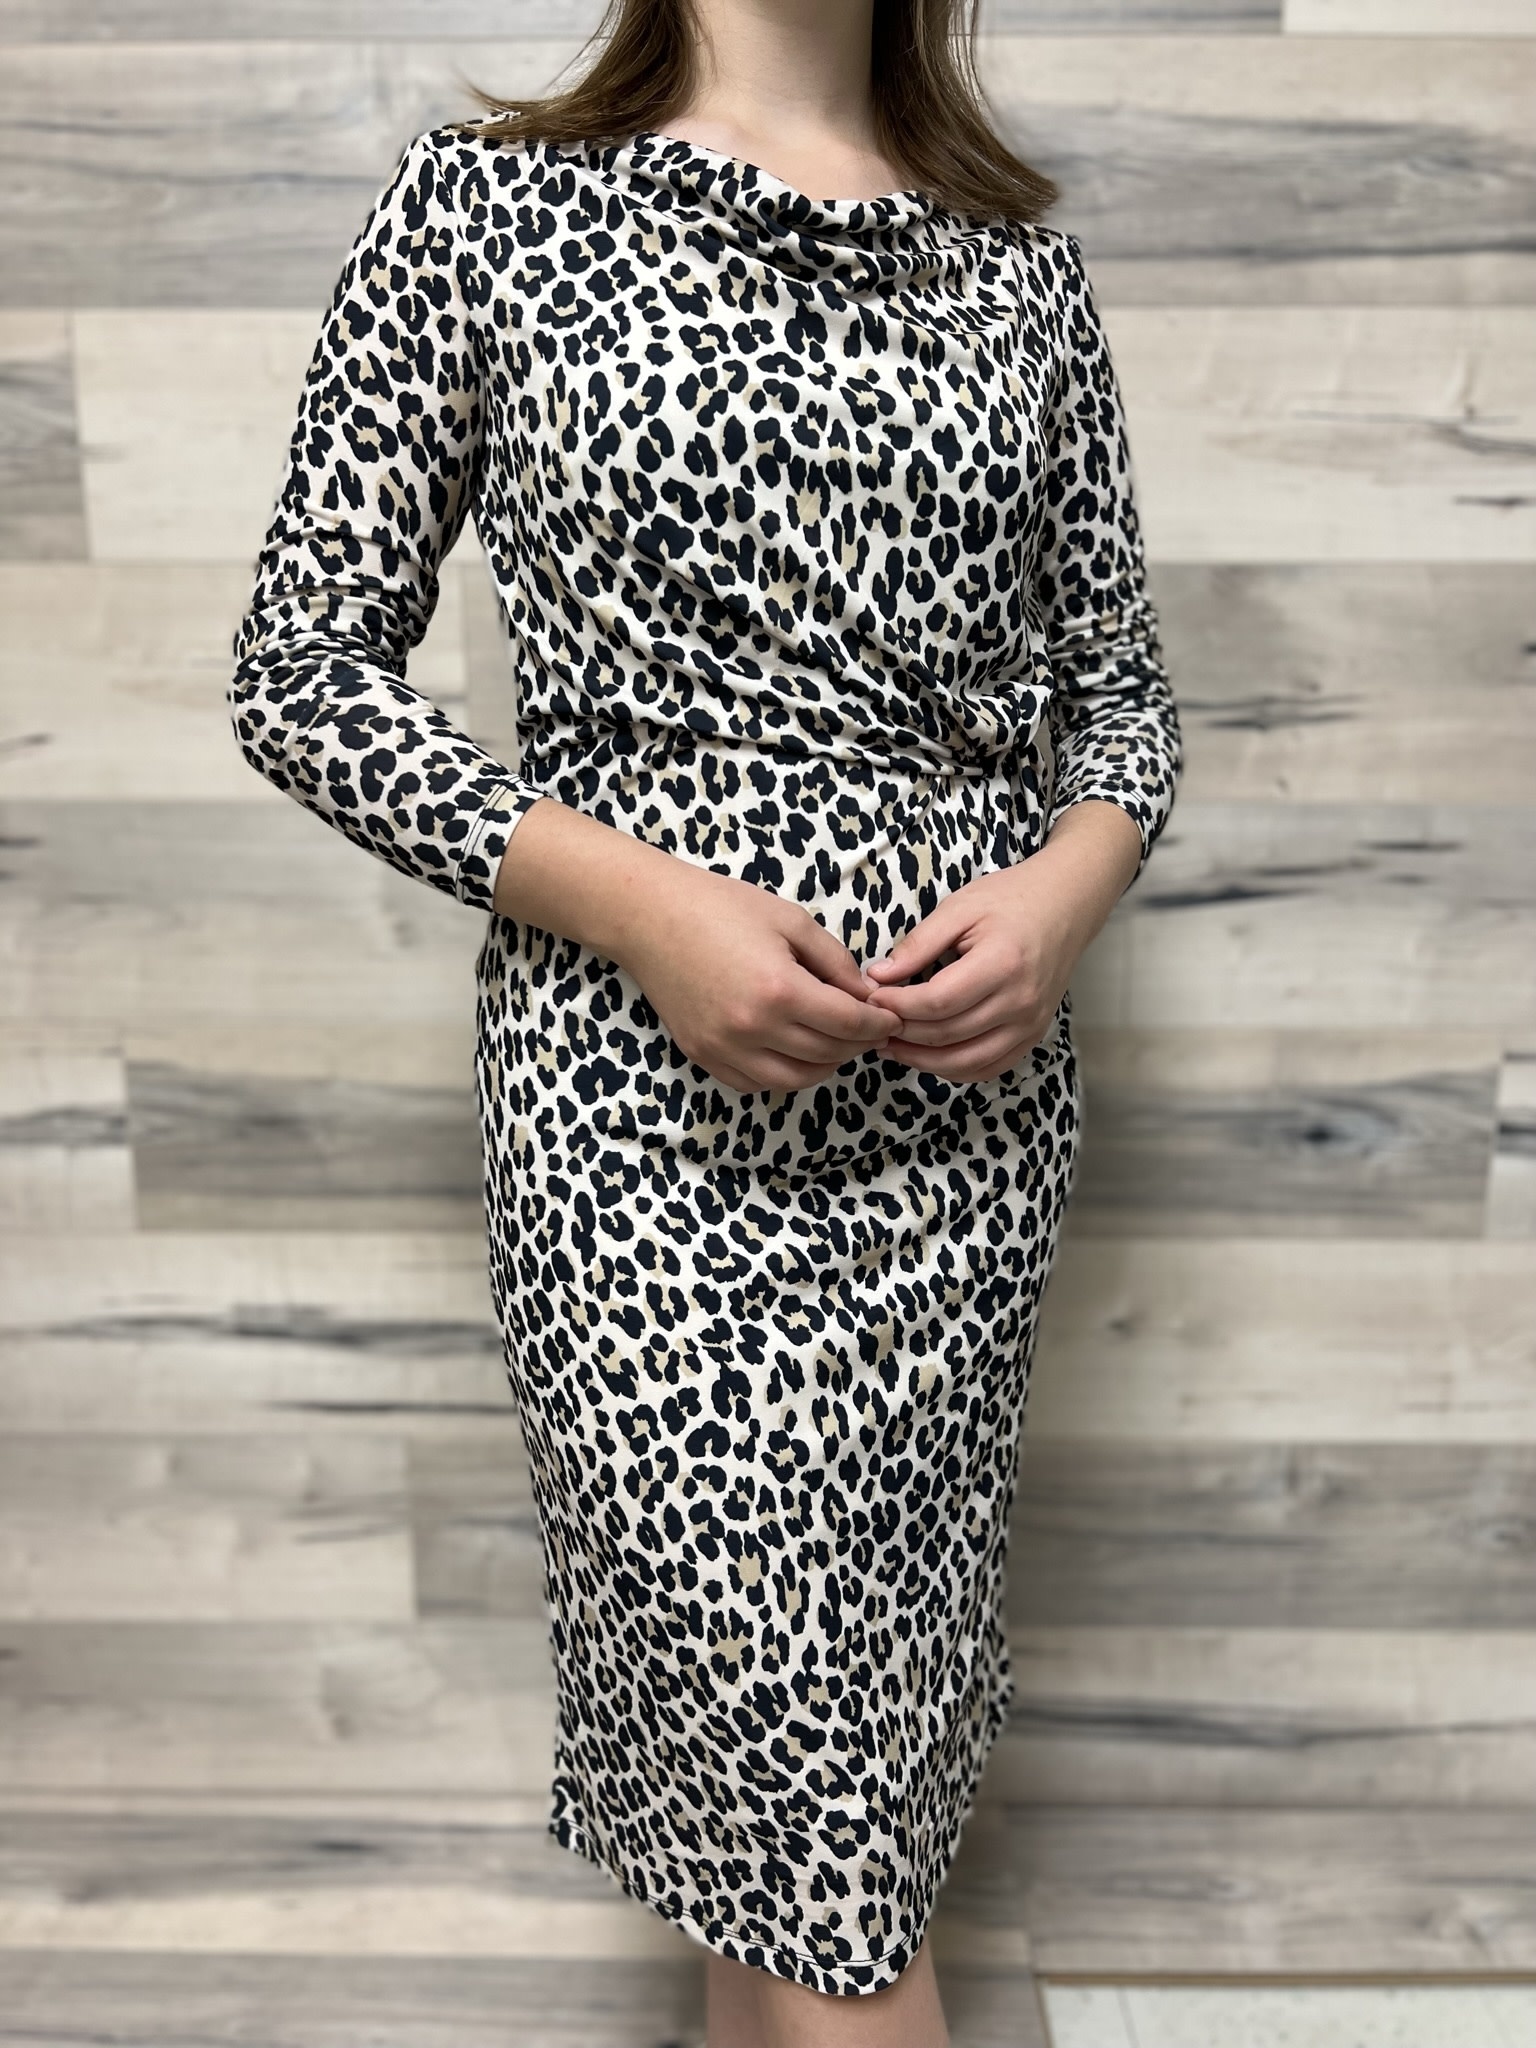 Knotted Dress with Small Cowl - Navy and Light Sand Leopard Print